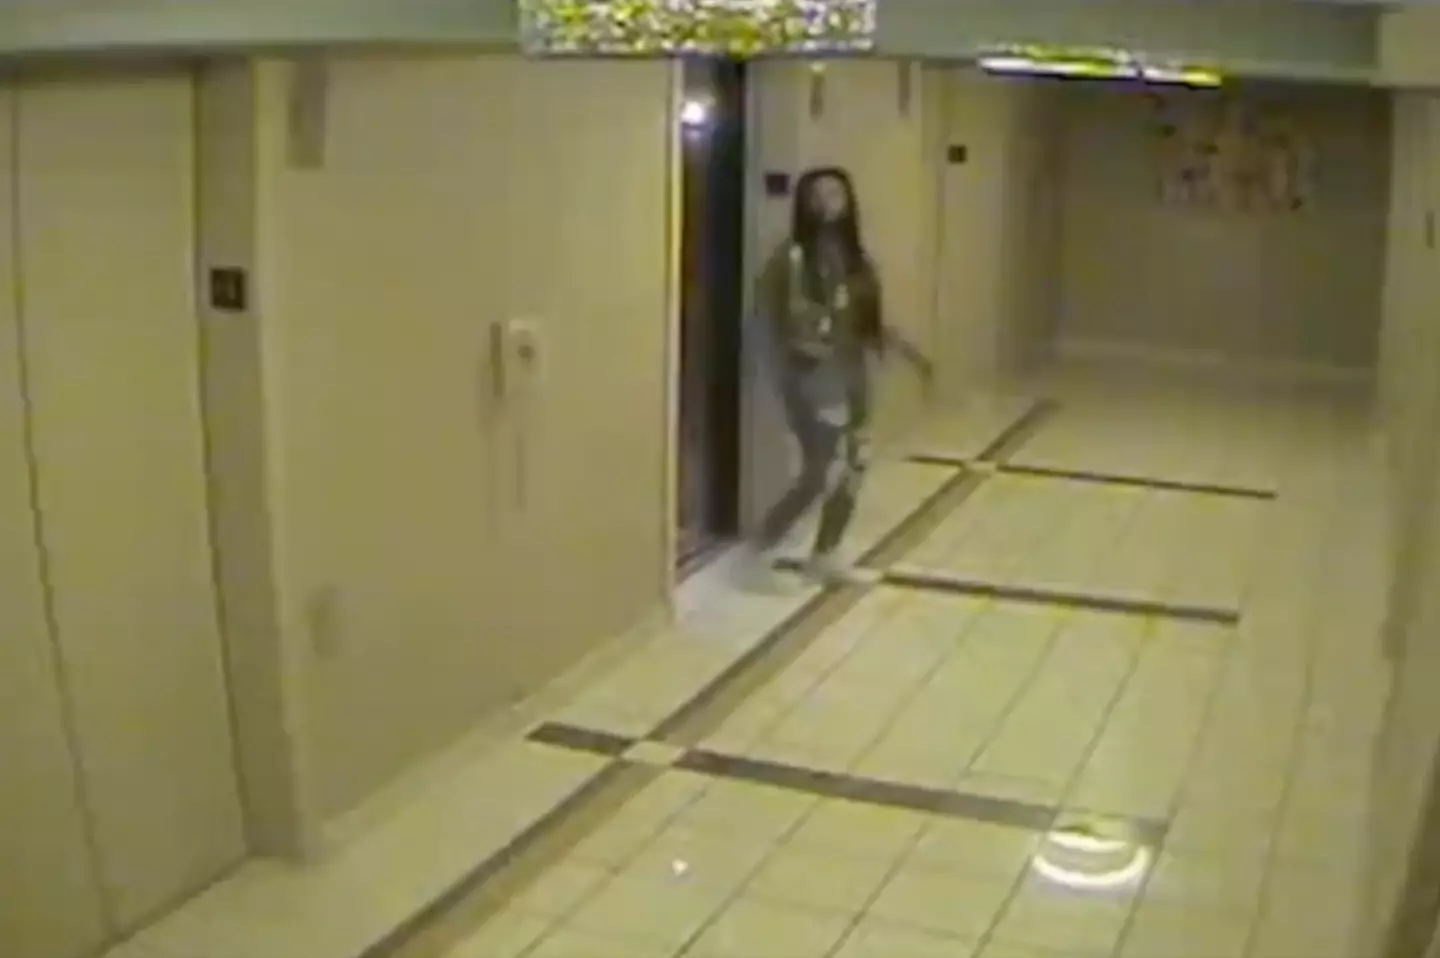 Kenneka Jenkins was seen countless times on CCTV.